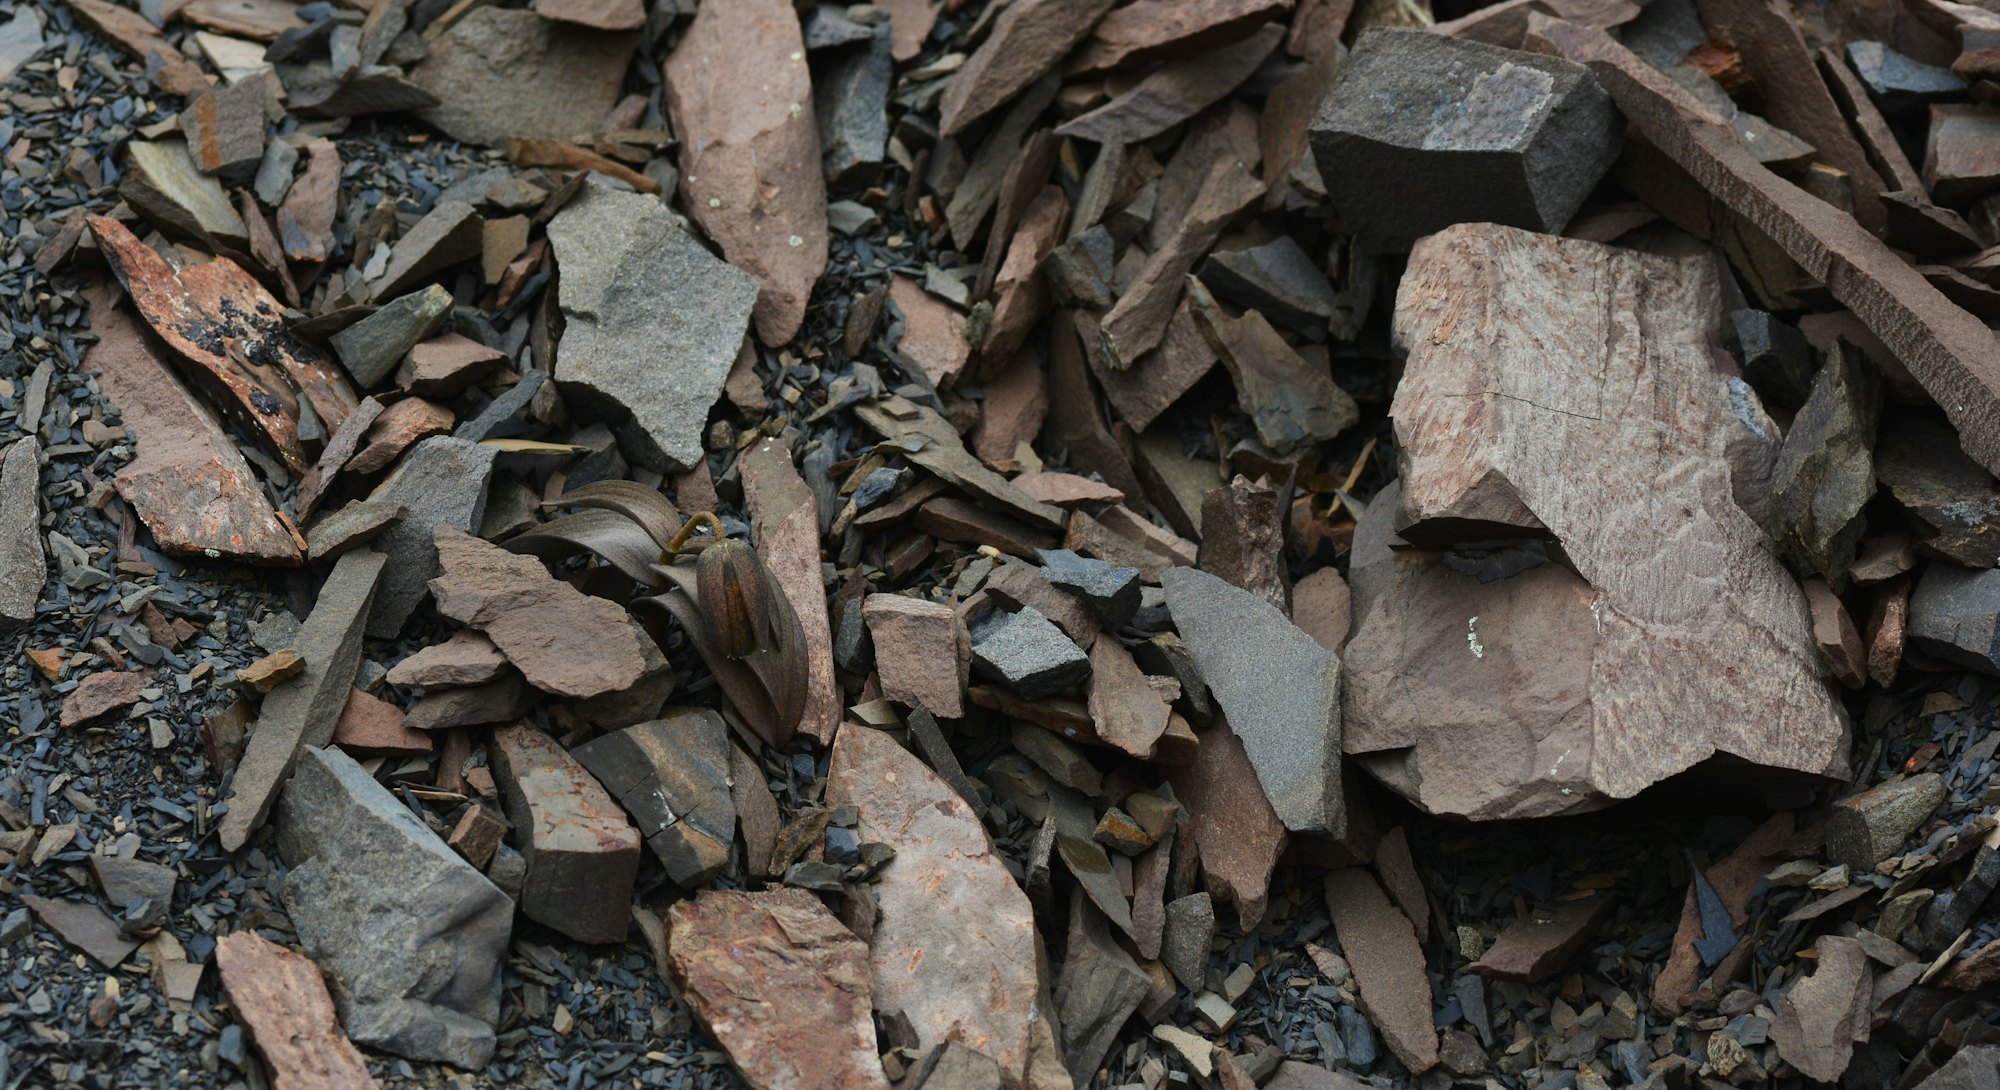 Chinese herb camouflaged against rocks